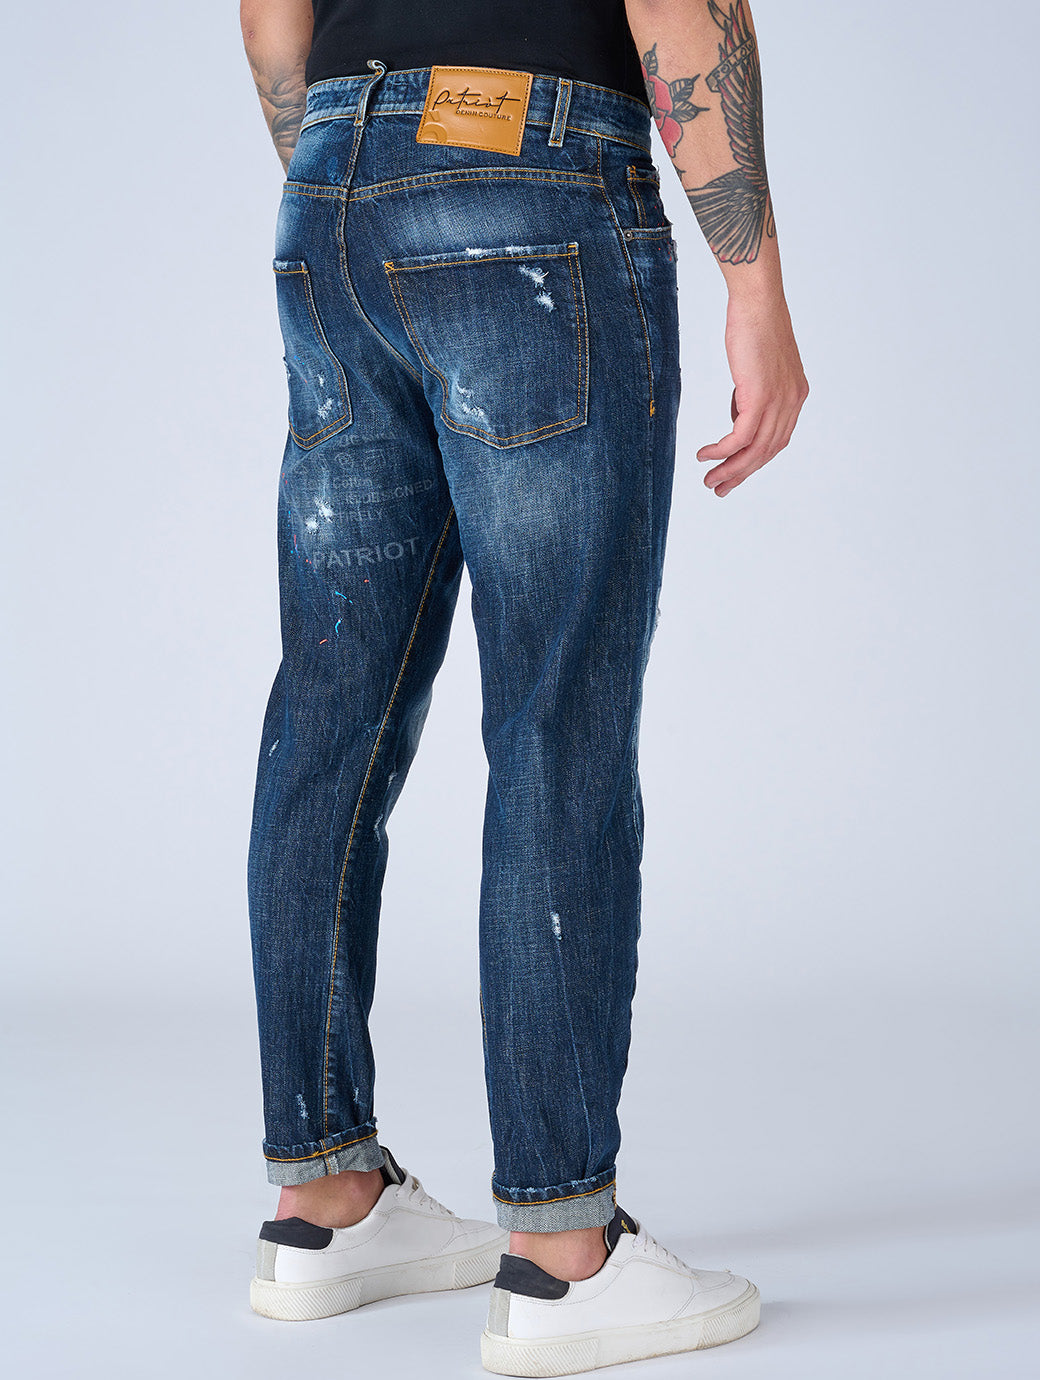 Patriòt Denim Couture Jeans Uomo Carrot Fit  Pkay16111 – SS23 Edition